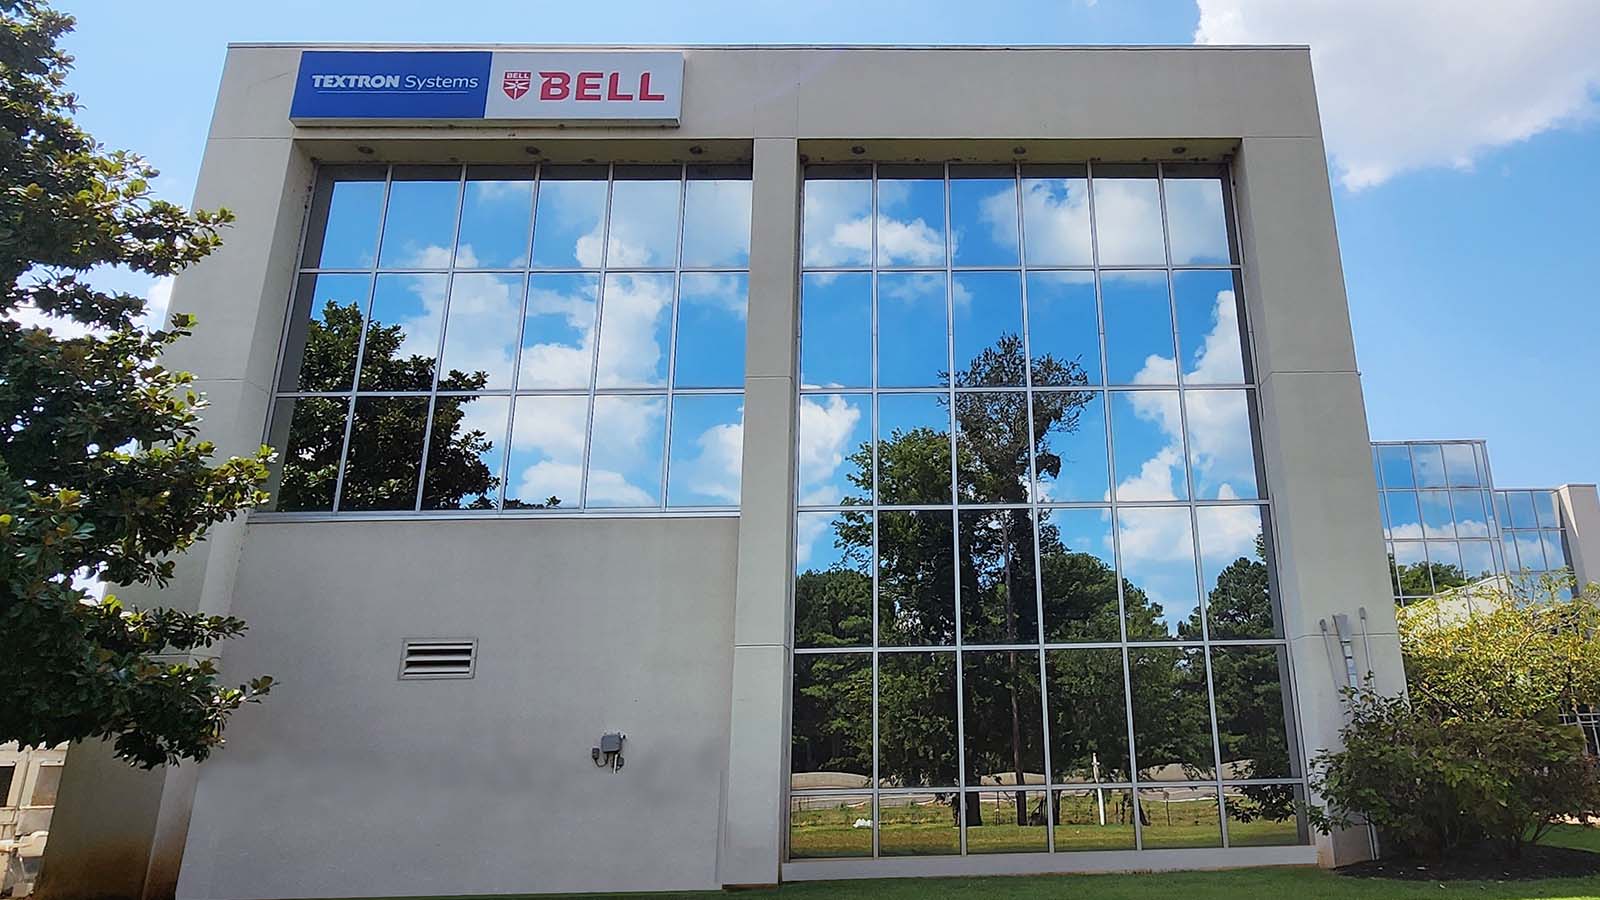 Building exterior of the Textron Systems Bell location